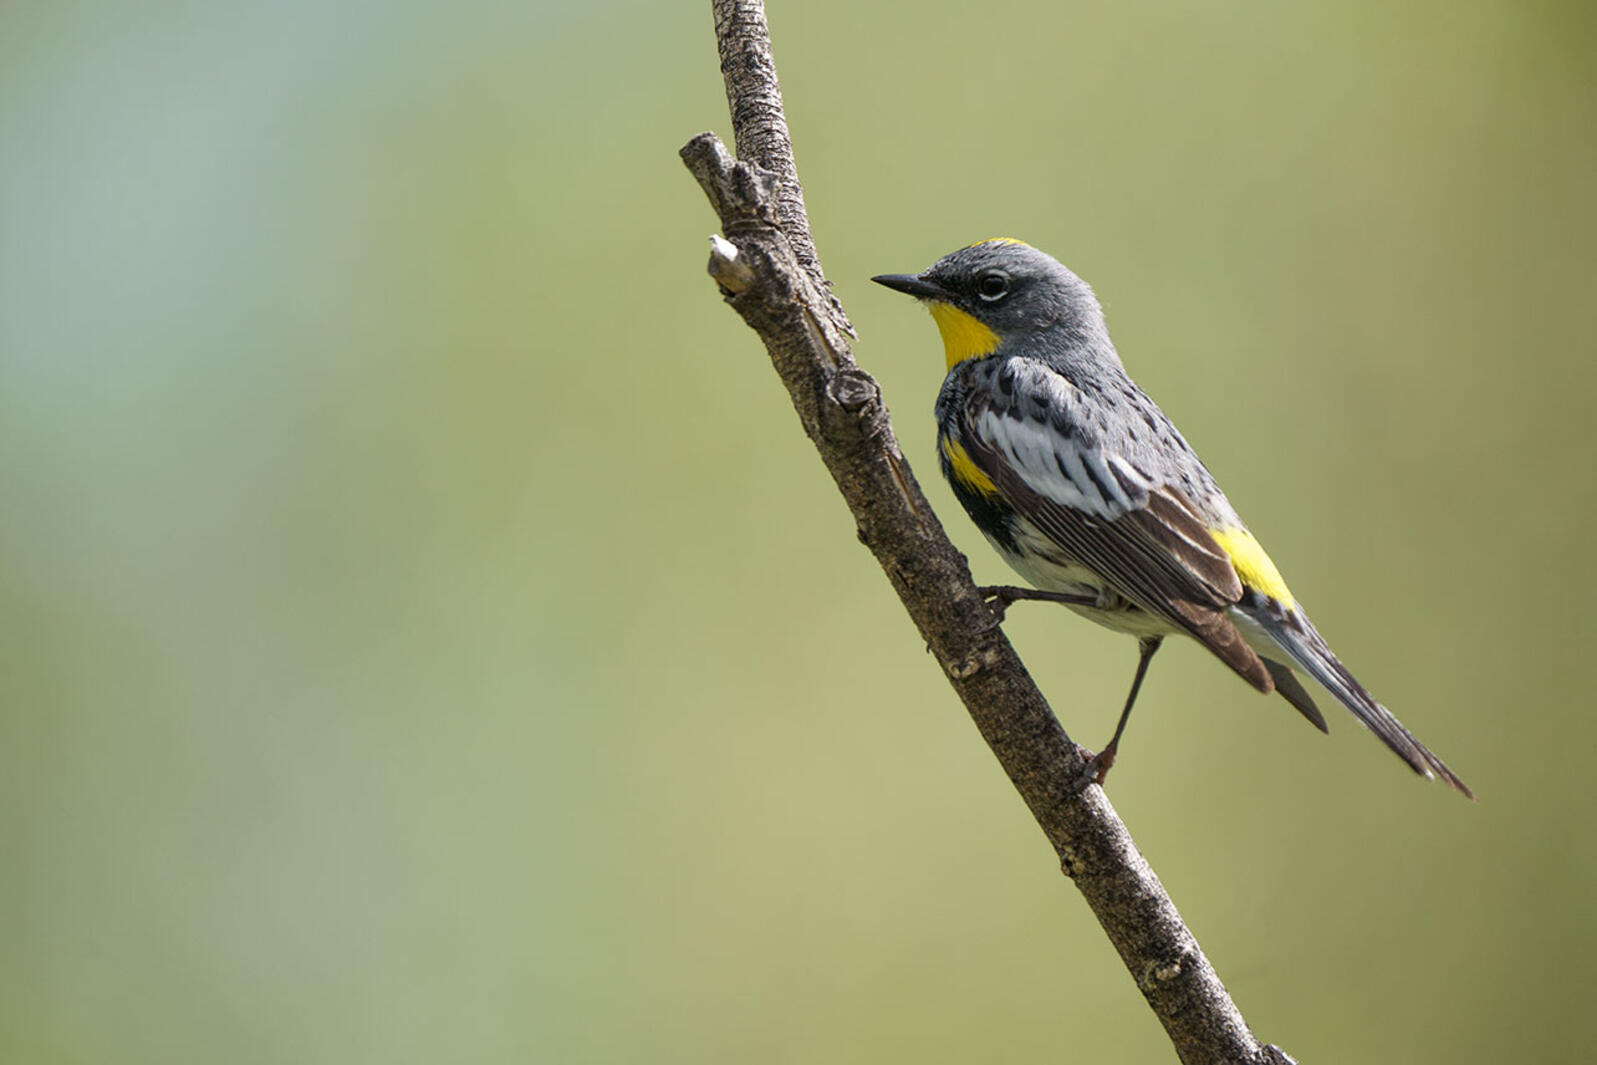 A Yellow-rumped Warbler perched on a branch.